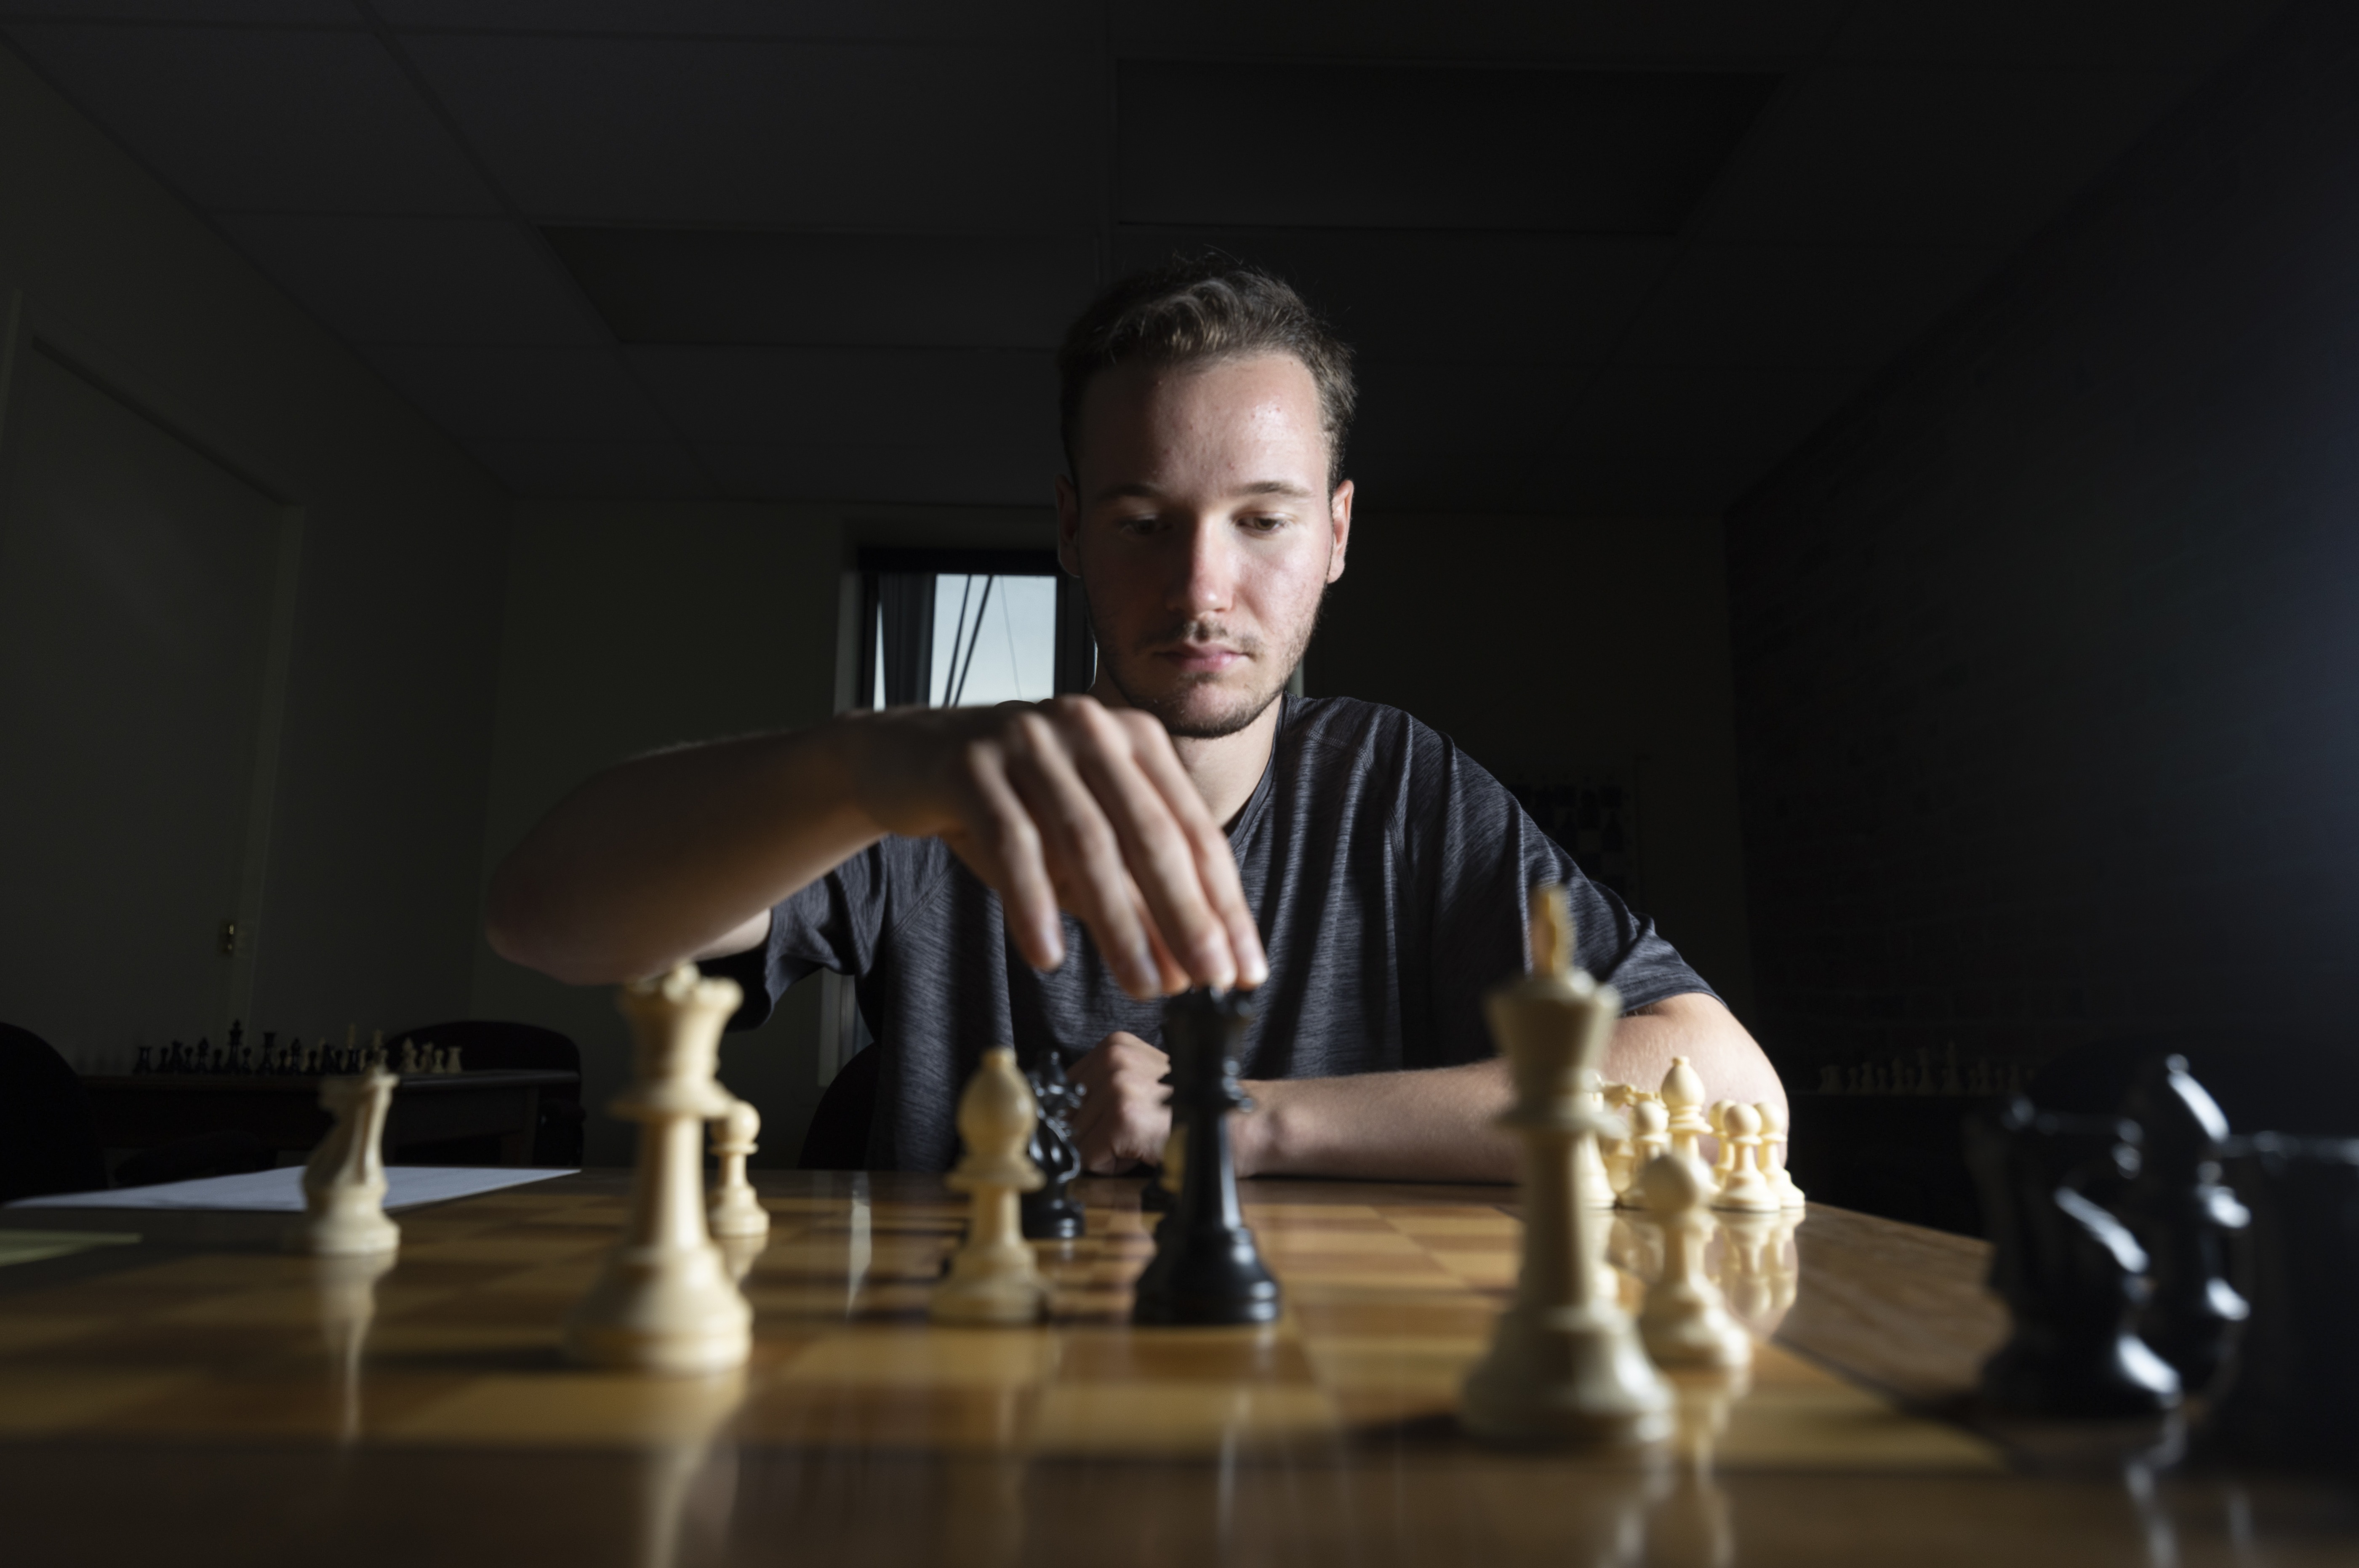 Chess is a young person's game, but one former world chess champ still  excels in his 50s - The Globe and Mail